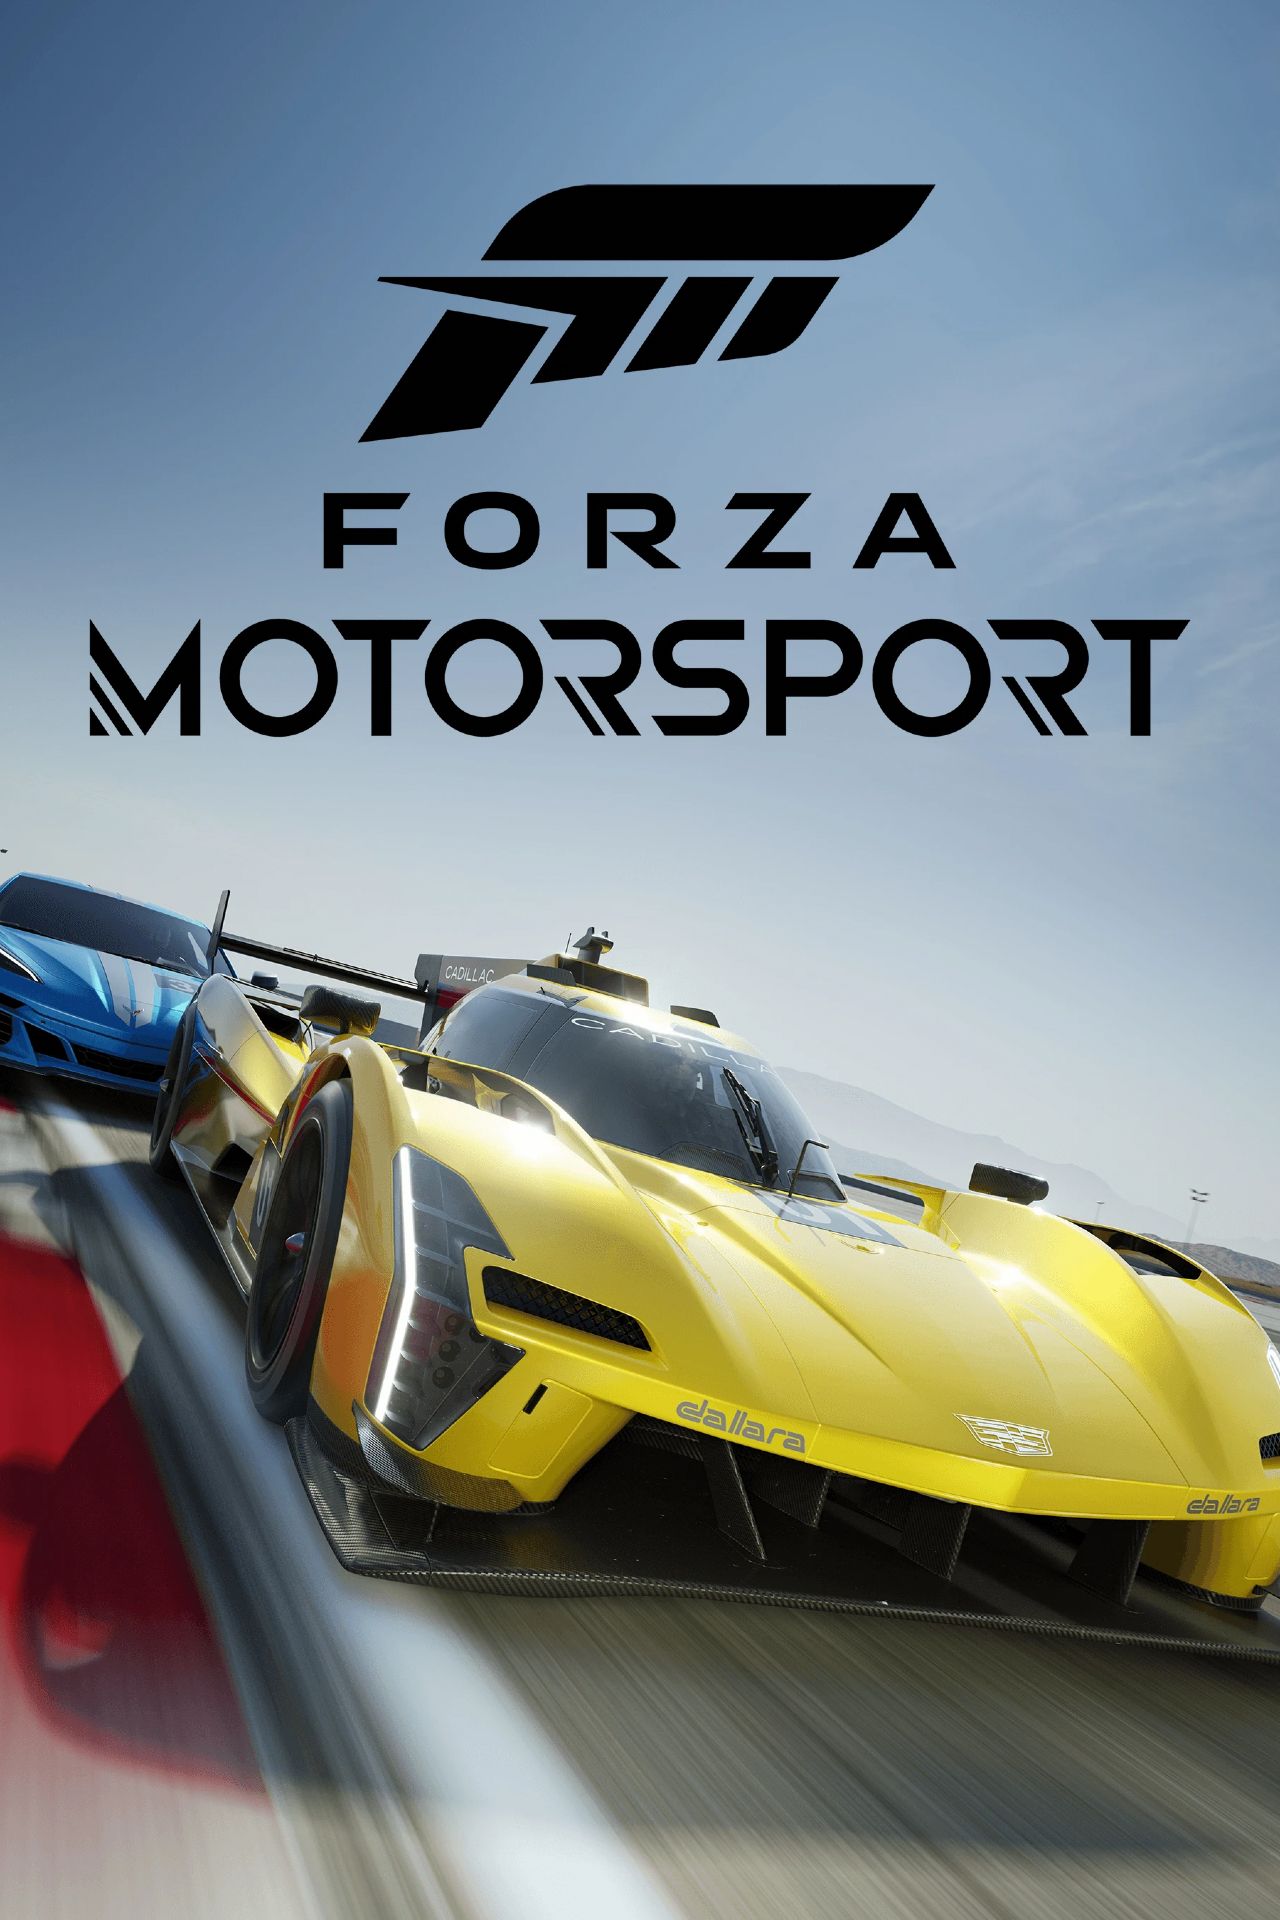 Forza Motorsport 2023 Game Poster